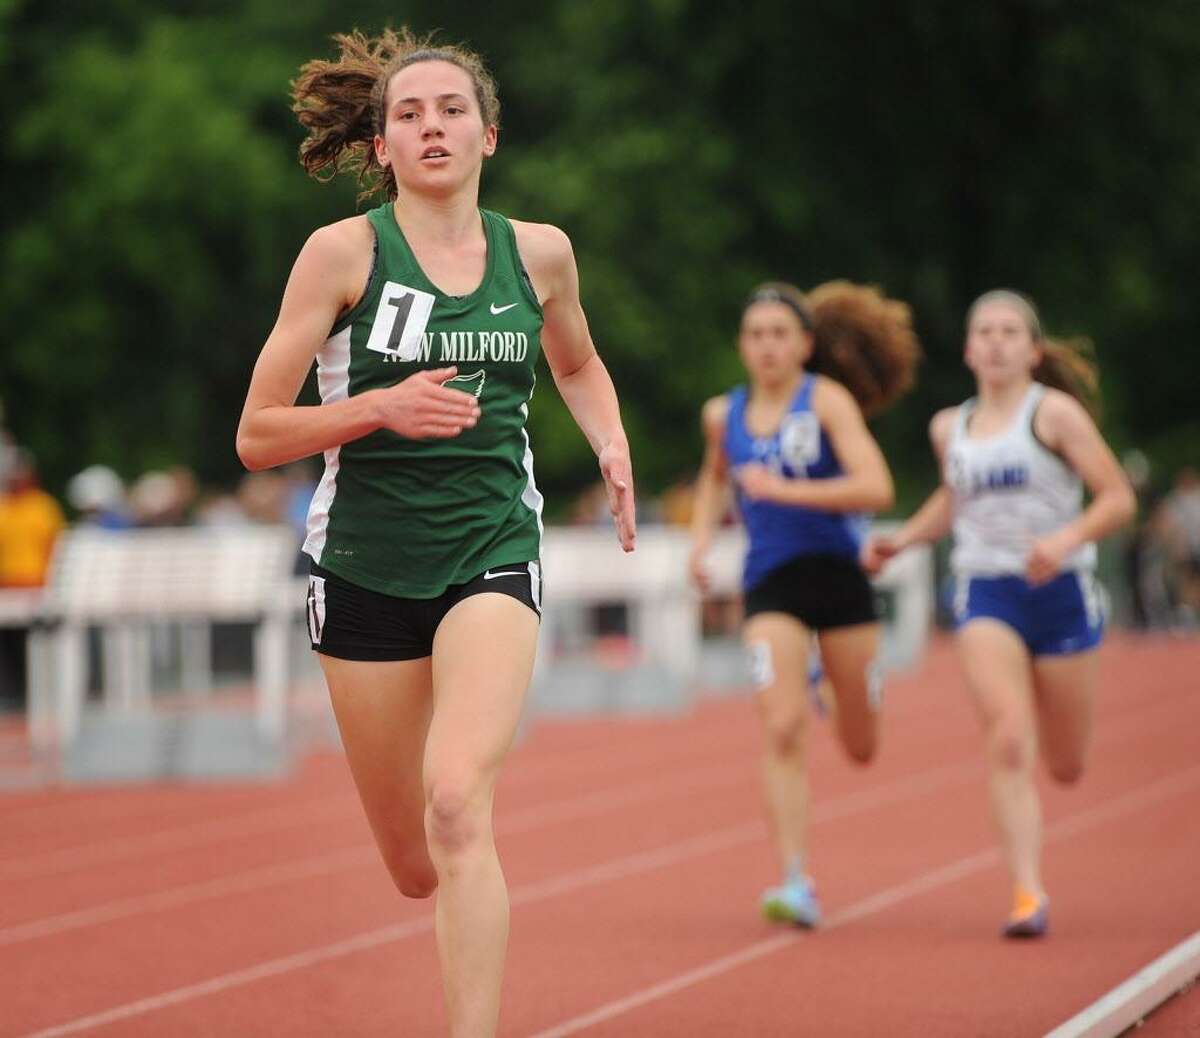 New Milford's Mia Nahom runs to an easy victory in the girls 1600 meters at the State Open outdoor track championships at Willow Brook Park in New Britain on Monday.